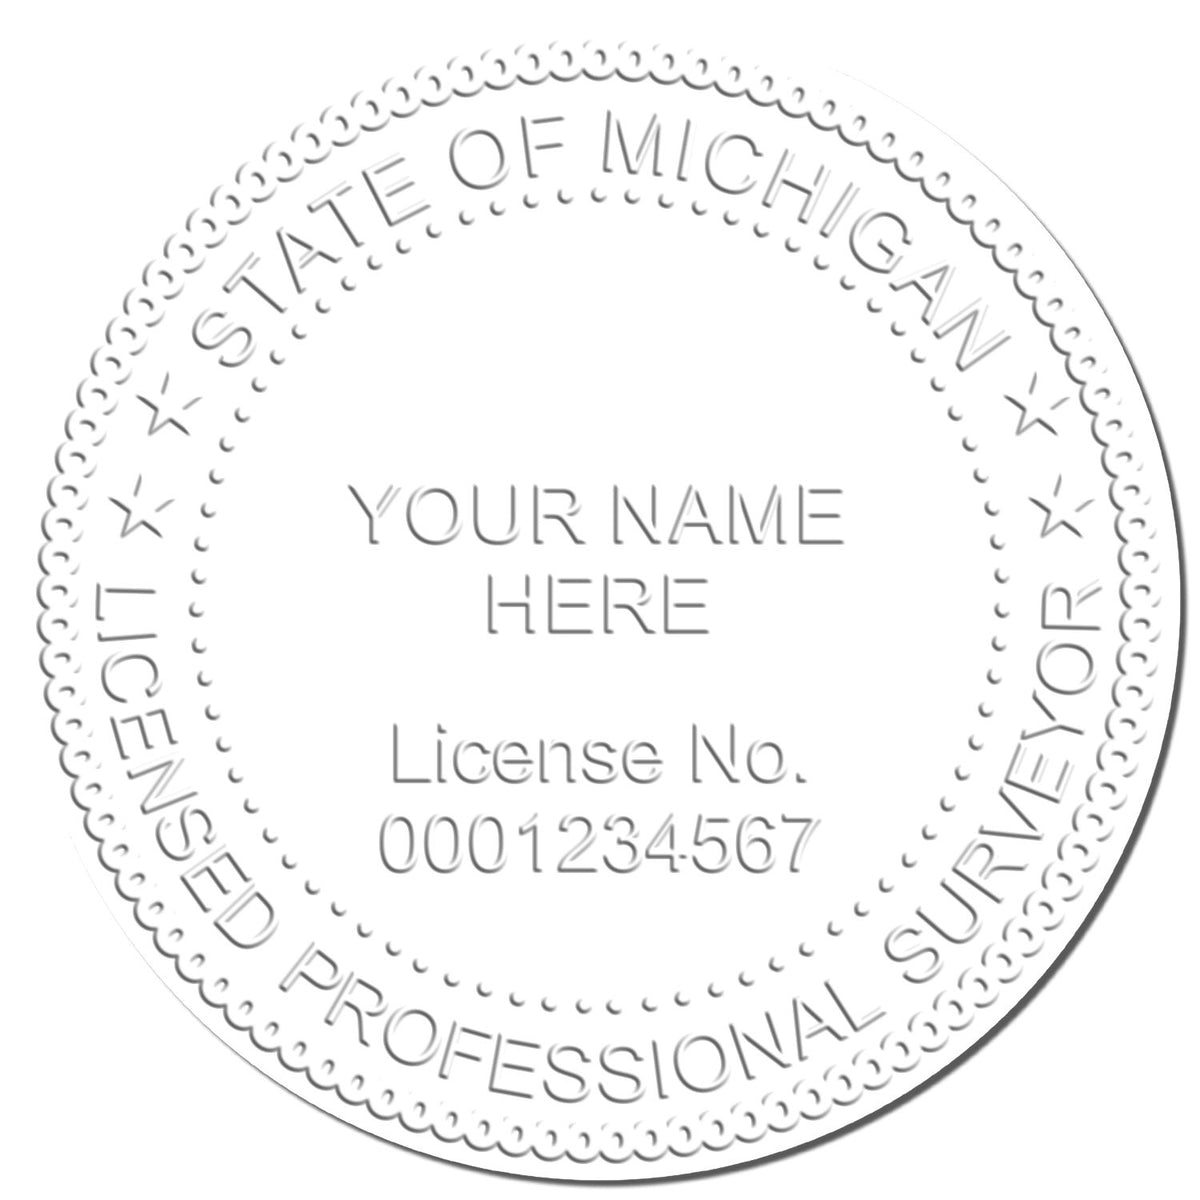 This paper is stamped with a sample imprint of the State of Michigan Soft Land Surveyor Embossing Seal, signifying its quality and reliability.